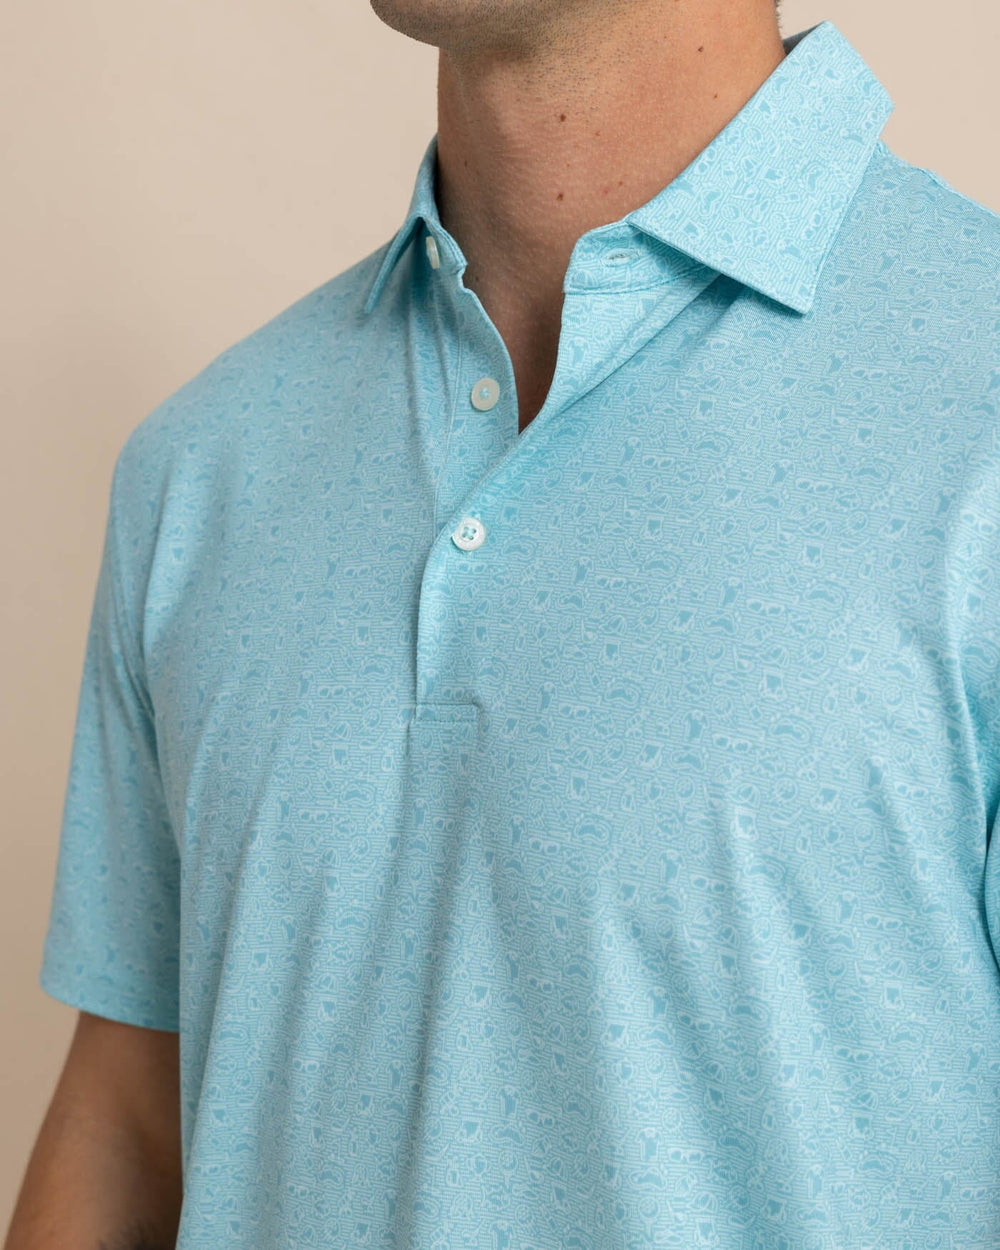 The detail view of the Southern Tide Driver Let's Go Clubbing Printed Polo by Southern Tide - Ocean Aqua